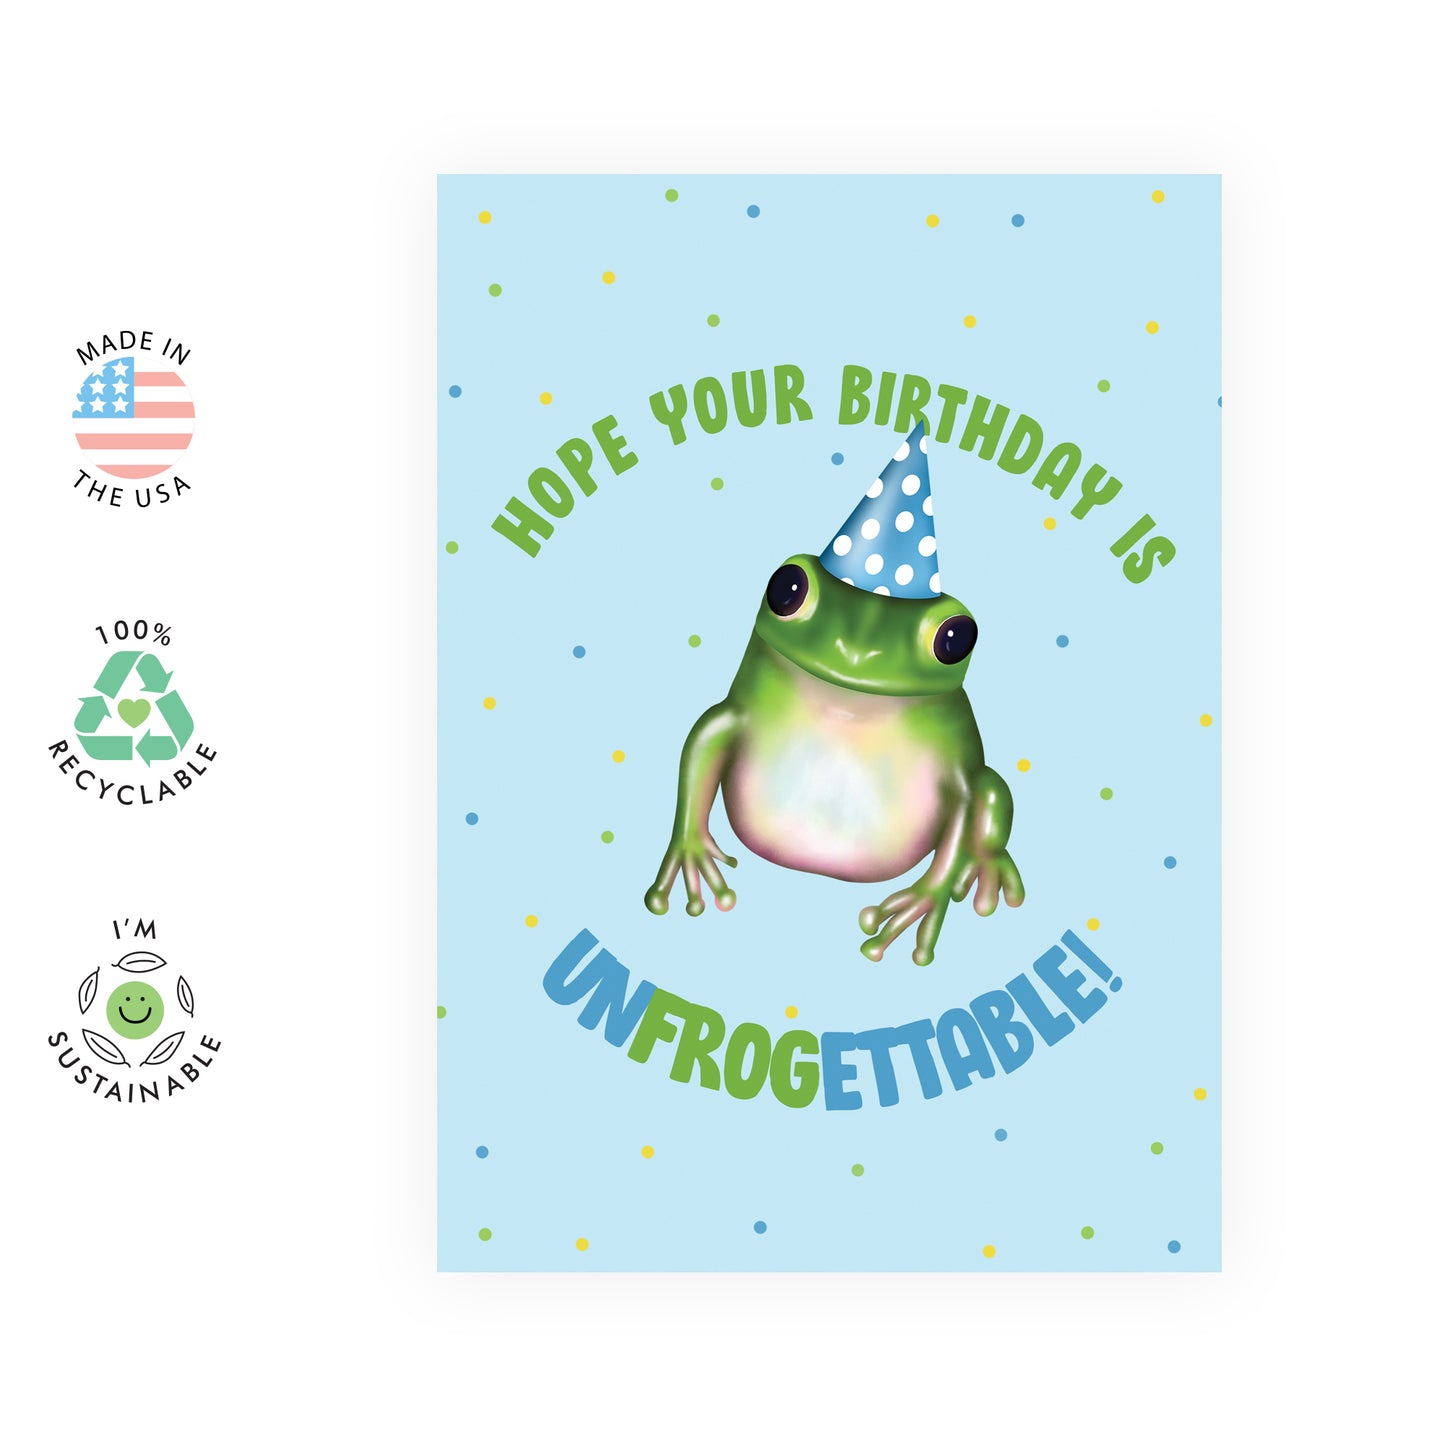 Funny Birthday Card - Hope Your Birthday Is Unfroggetable - For Men Women Boys Girls